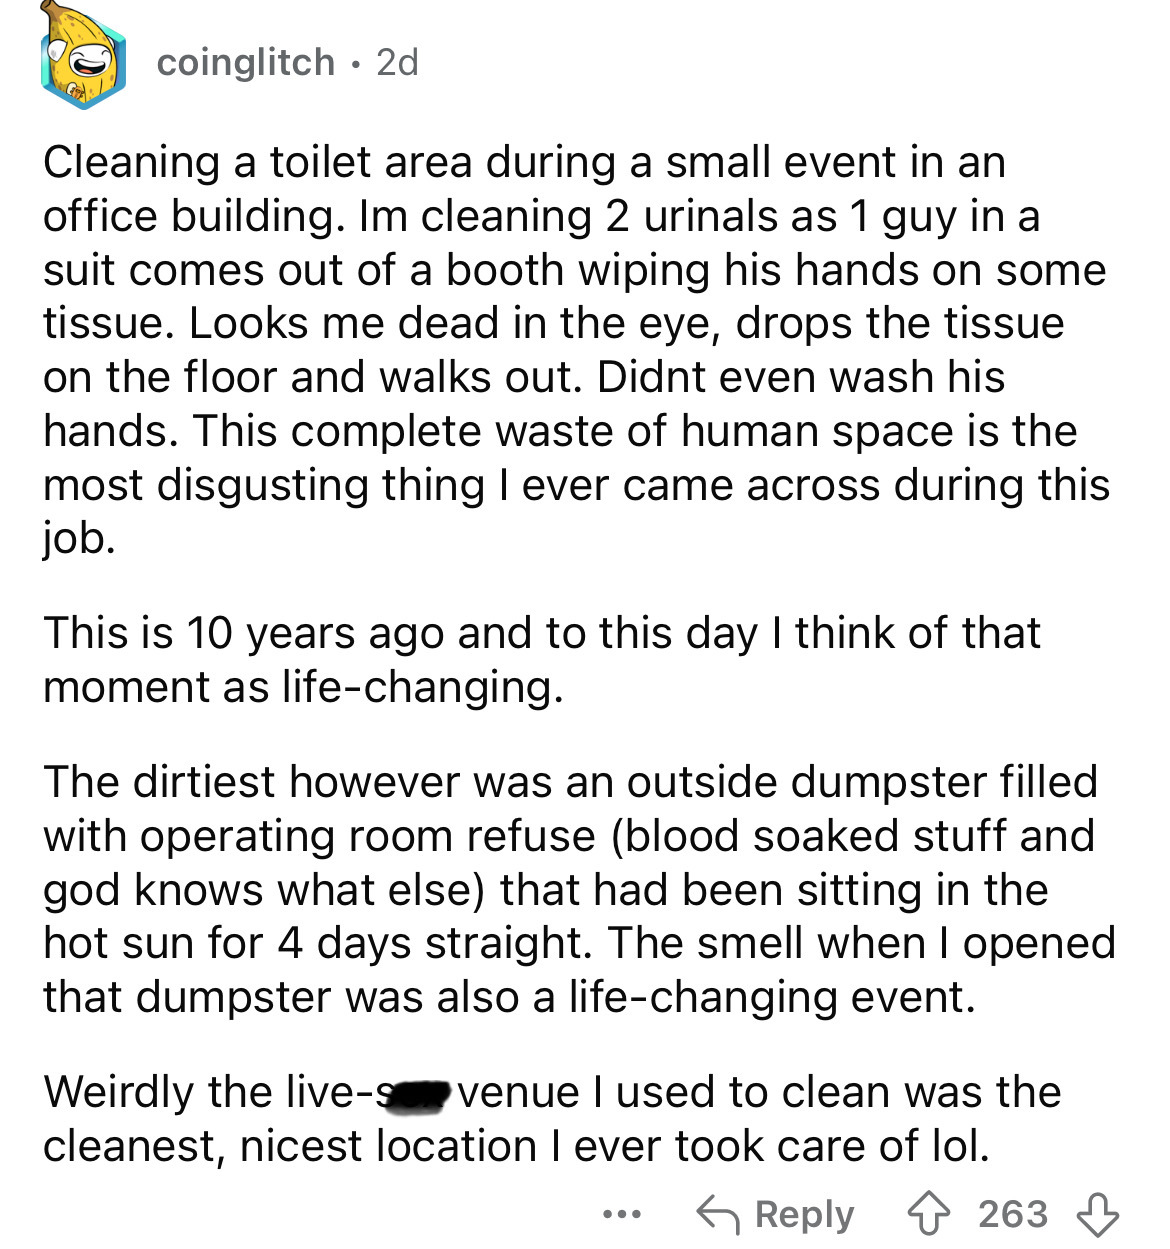 document - coinglitch 2d Cleaning a toilet area during a small event in an office building. Im cleaning 2 urinals as 1 guy in a suit comes out of a booth wiping his hands on some tissue. Looks me dead in the eye, drops the tissue on the floor and walks ou